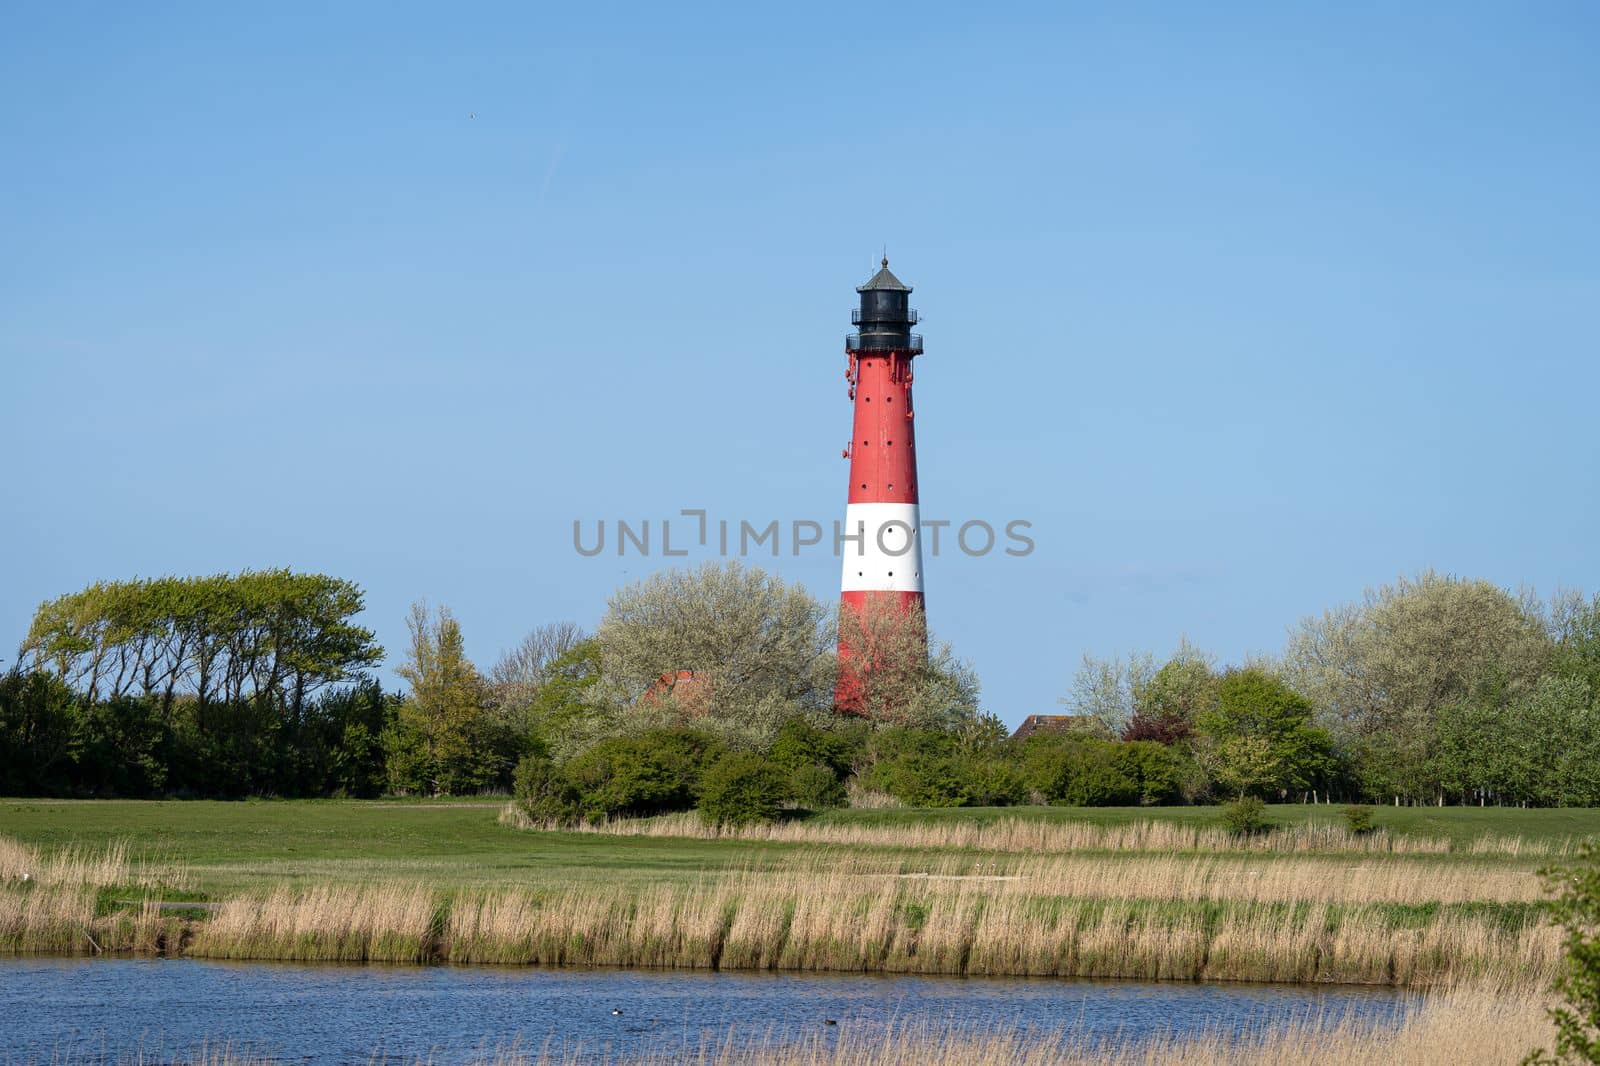 Lighthouse of Pellworm, North Frisia, Germany by alfotokunst